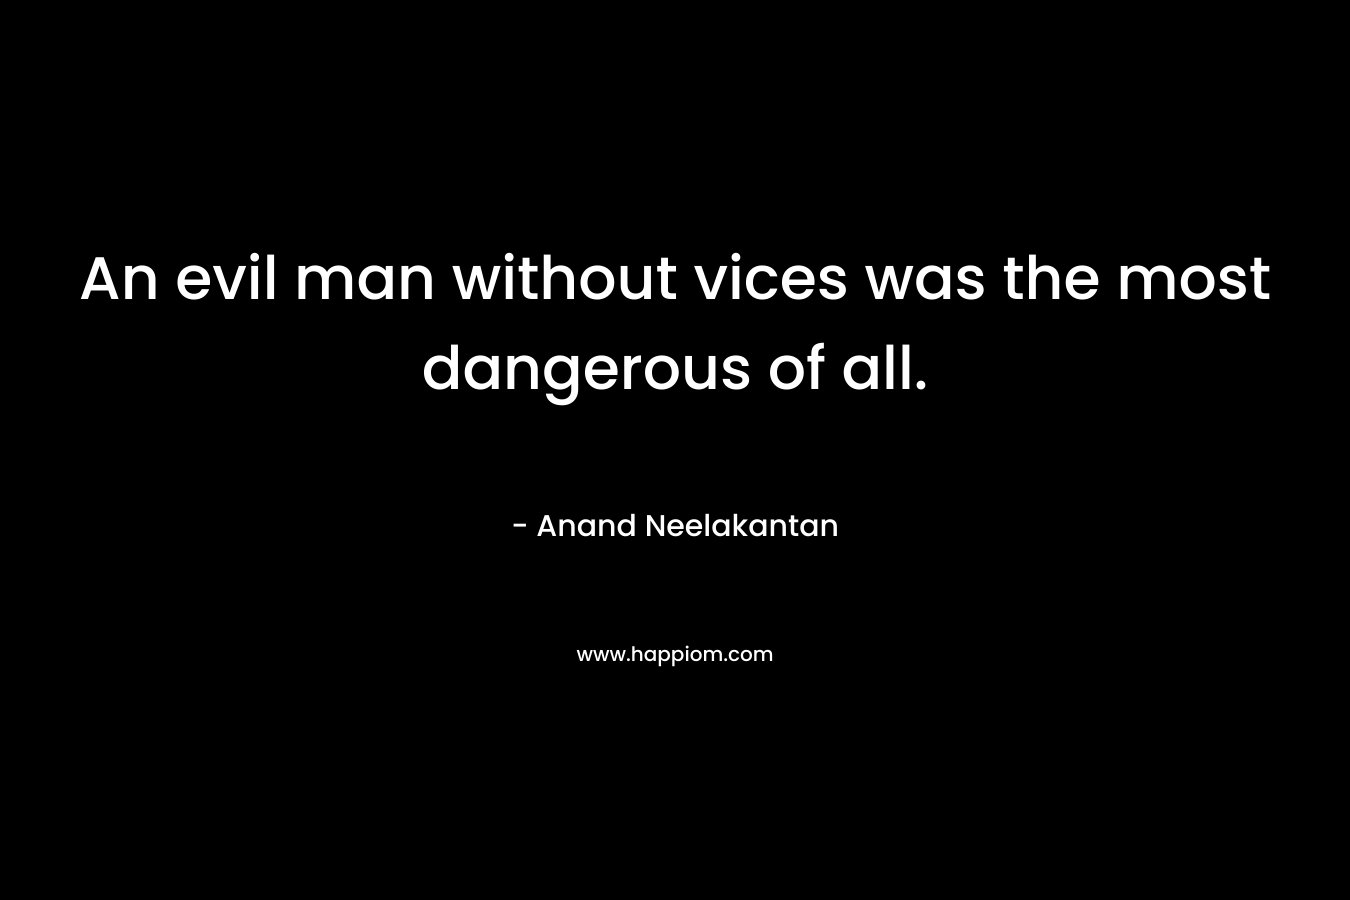 An evil man without vices was the most dangerous of all. – Anand Neelakantan